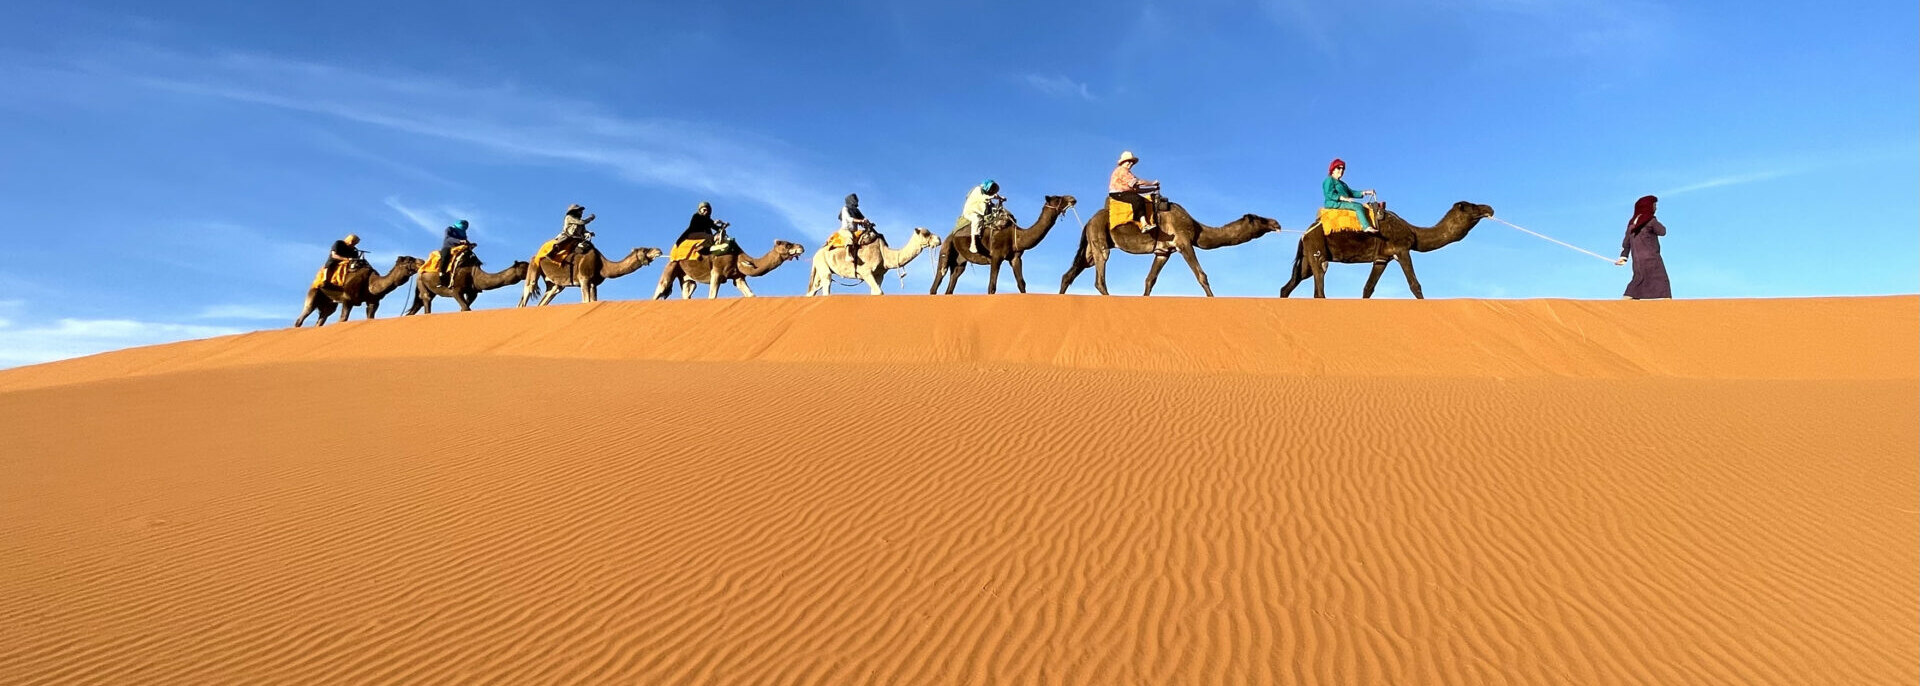 A group of tourists on camels traverse orange sand dunes at the edge of the Sahara Desert.